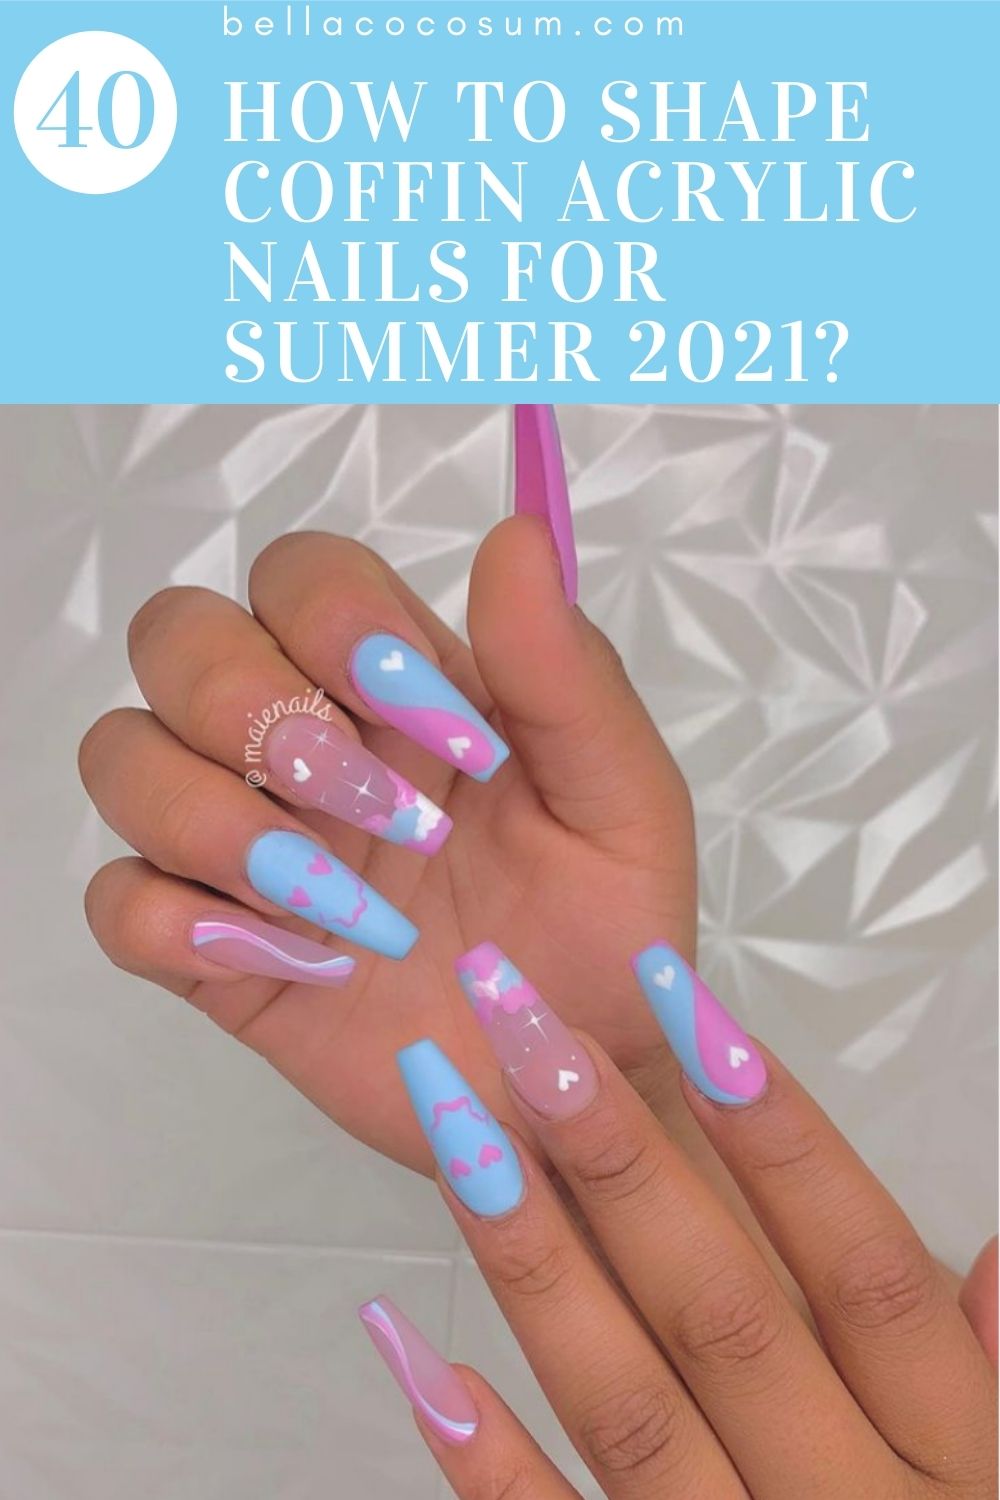 How To Shape Coffin Acrylic Nails For Summer 2021?